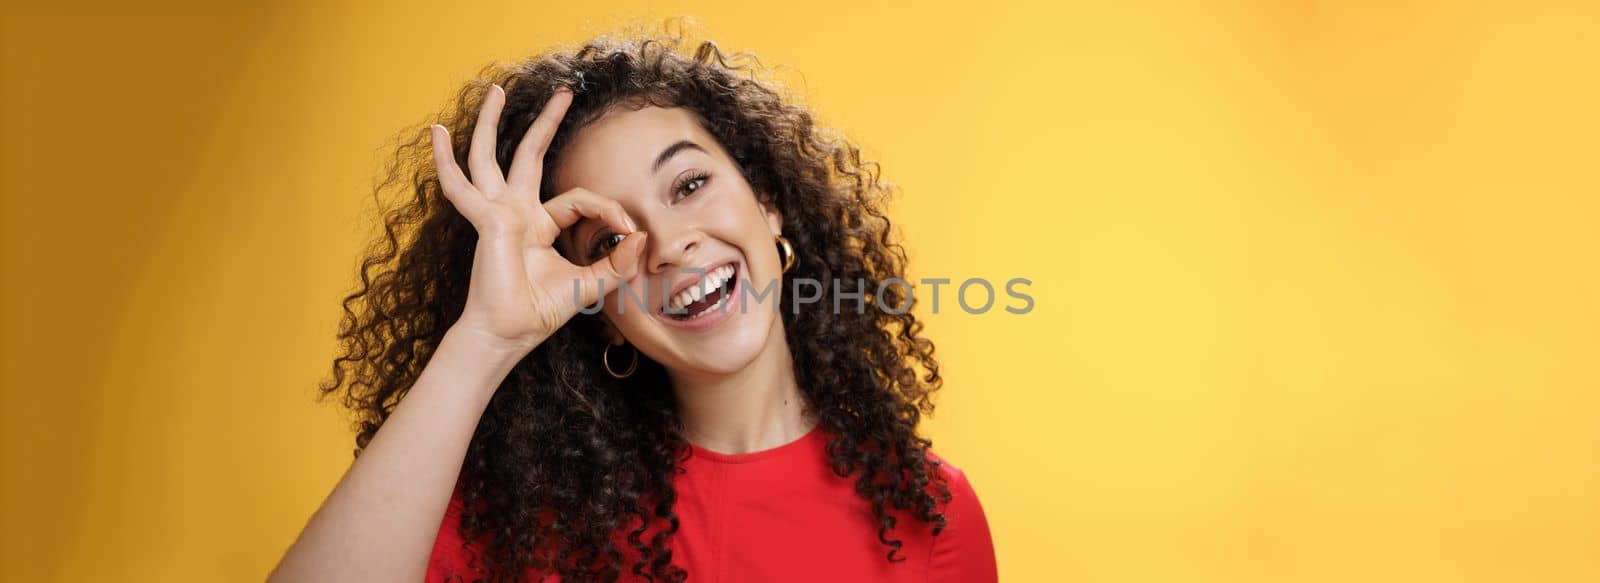 Hey I see you. Charismatic funny and playful cute tender girlfriend with curly hair showing okay or zero gesture over eye peeking at camera and smiling broadly, tilting head right over yellow wall.